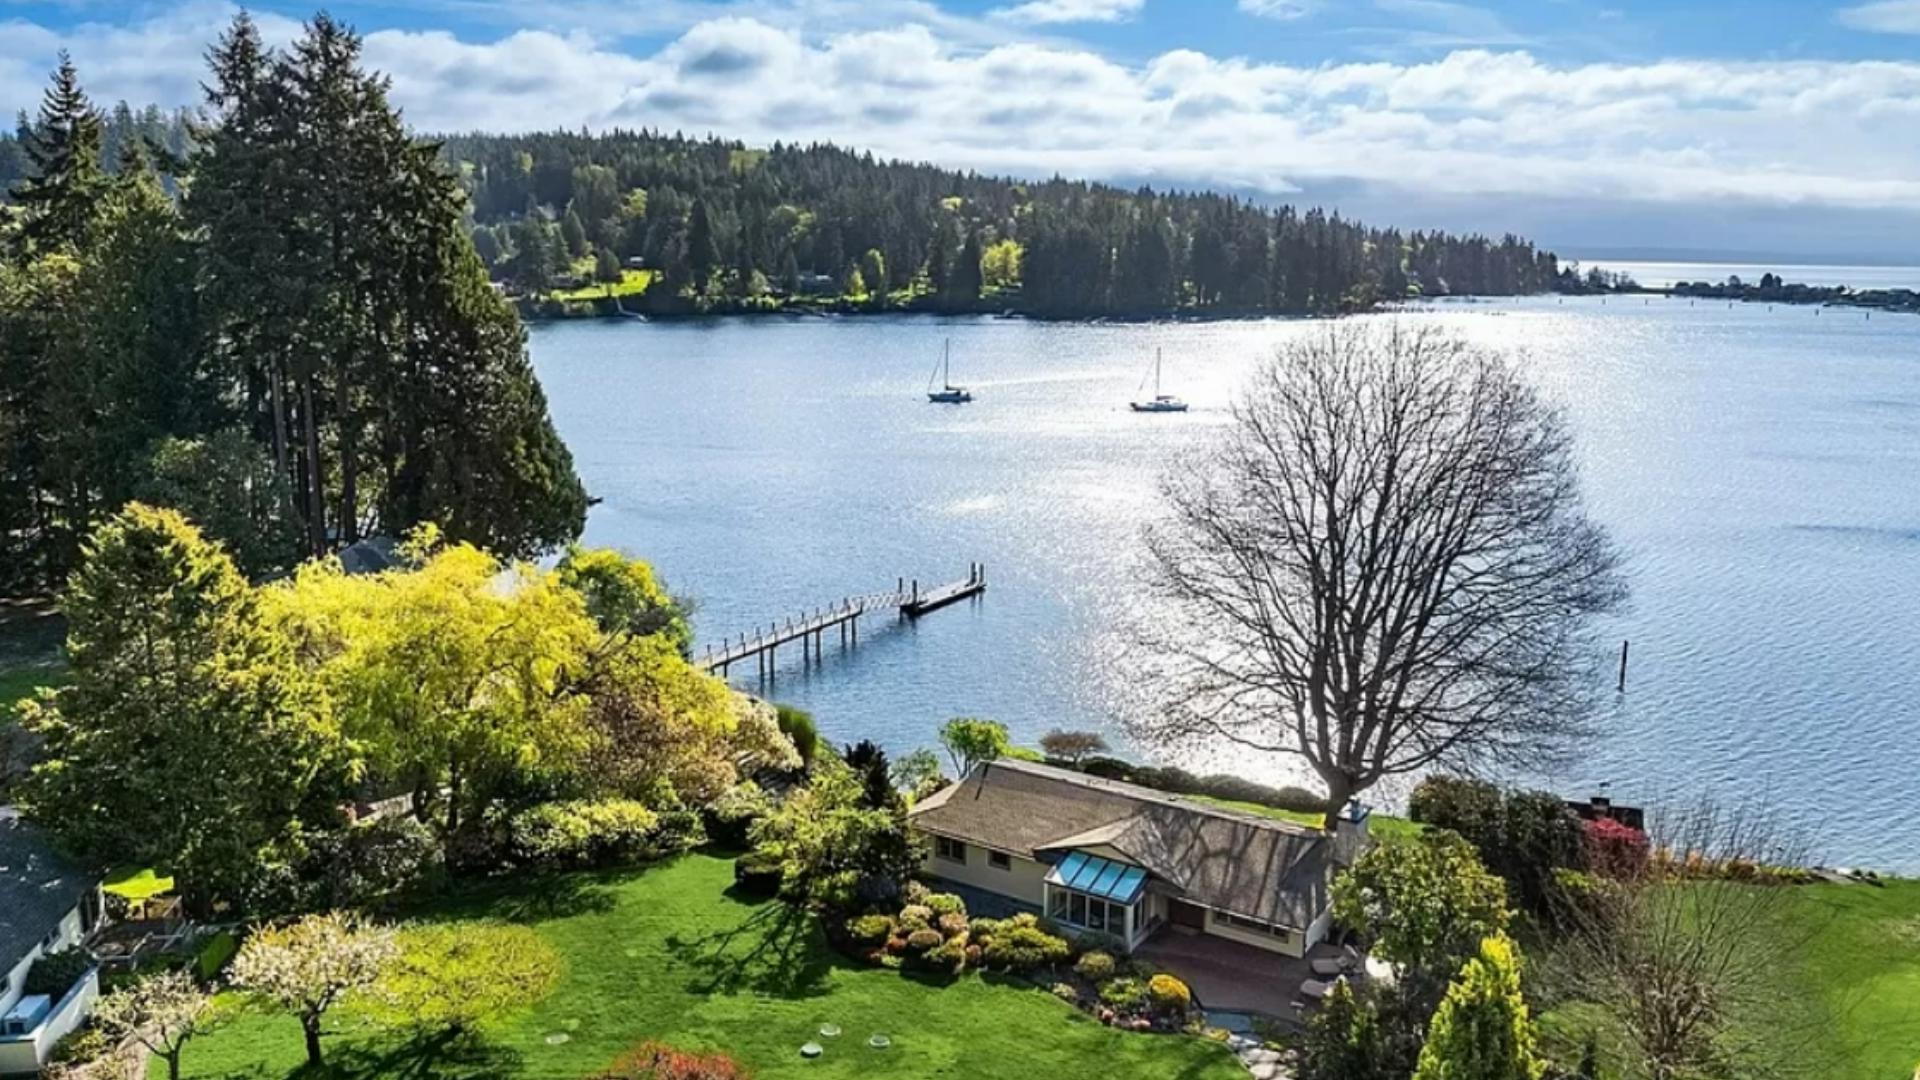 From treehouse to bunkhouse to luxurious main house, this 5 acre getaway has it all. #k5evening